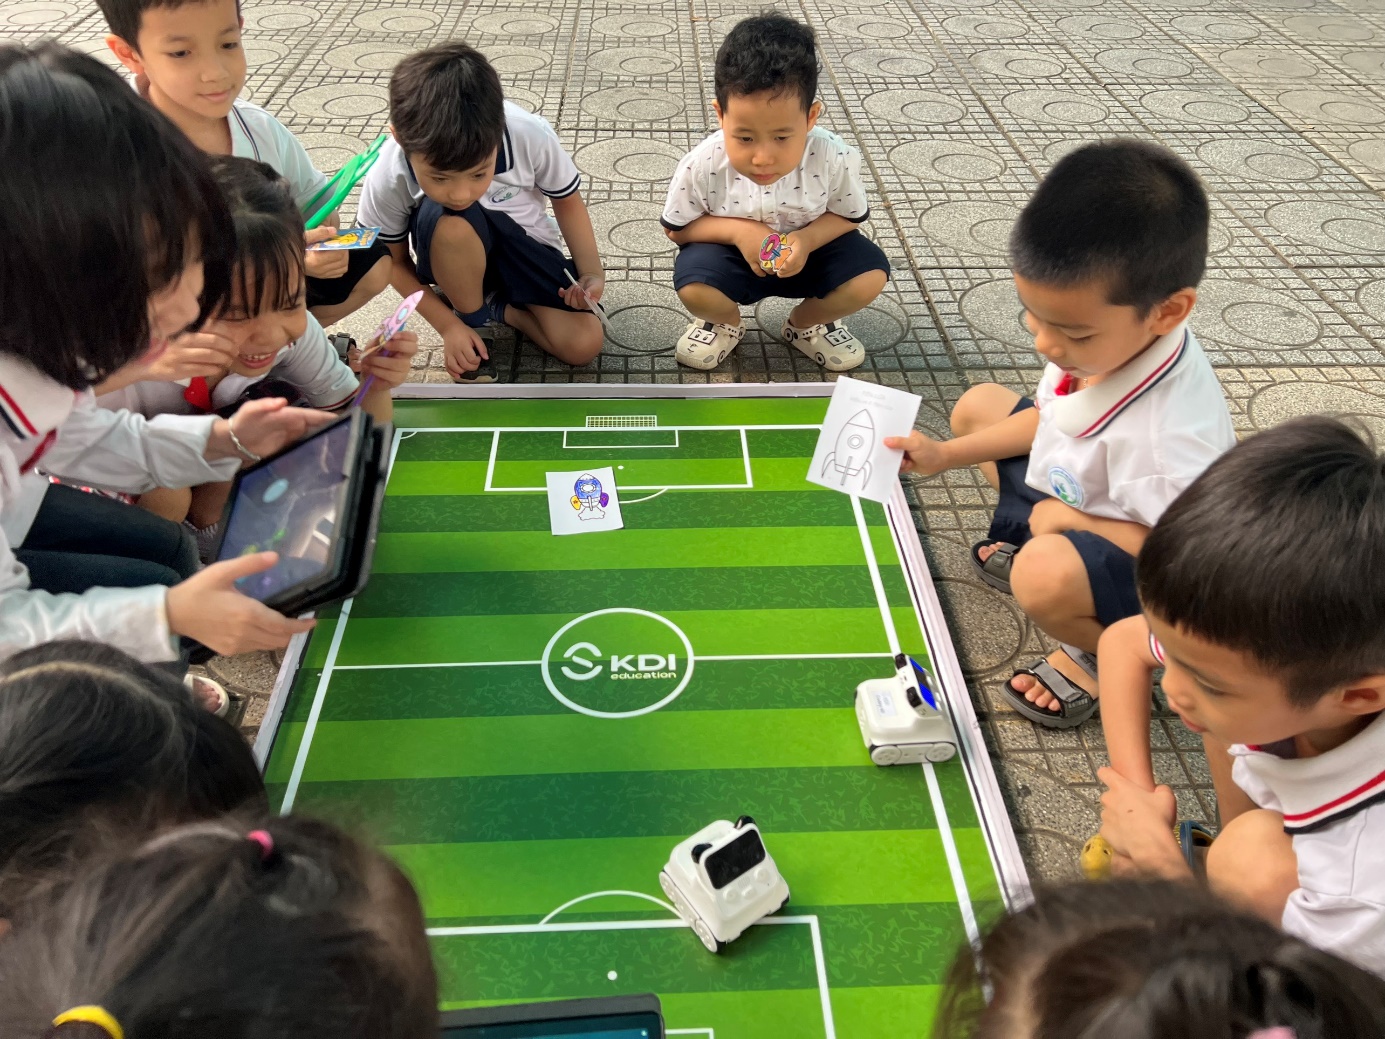 A group of children playing a game

Description automatically generated